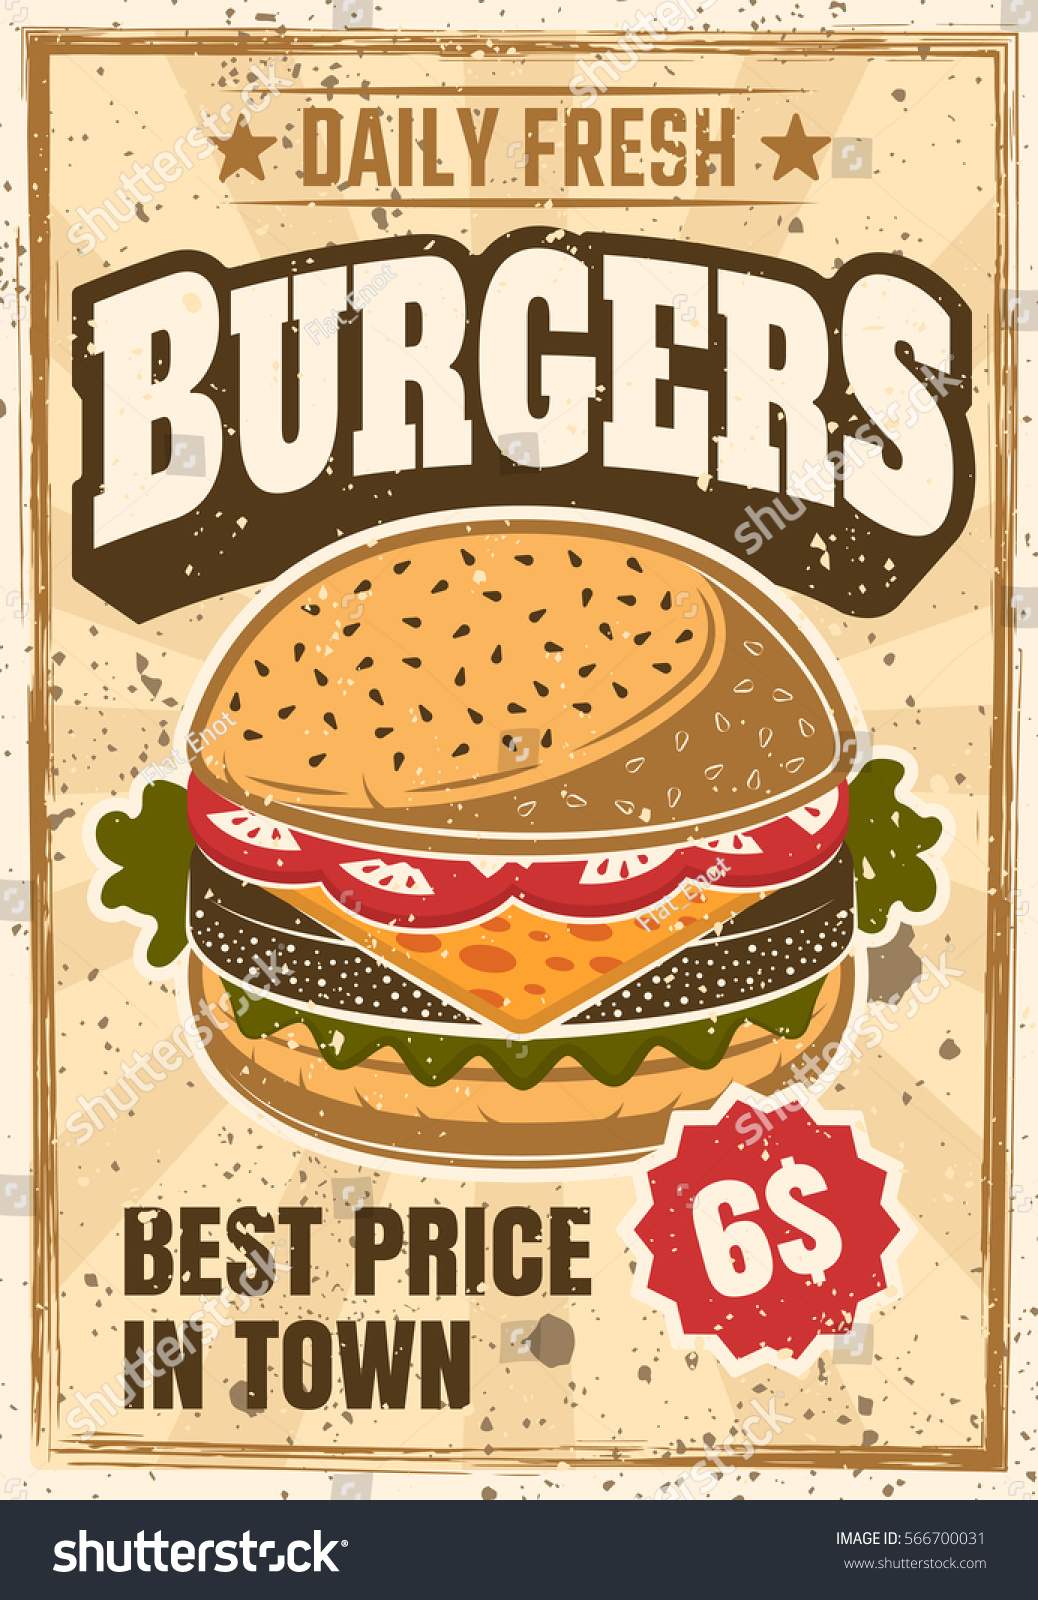 Burger Colored Advertising Poster Vintage Style Stock ...